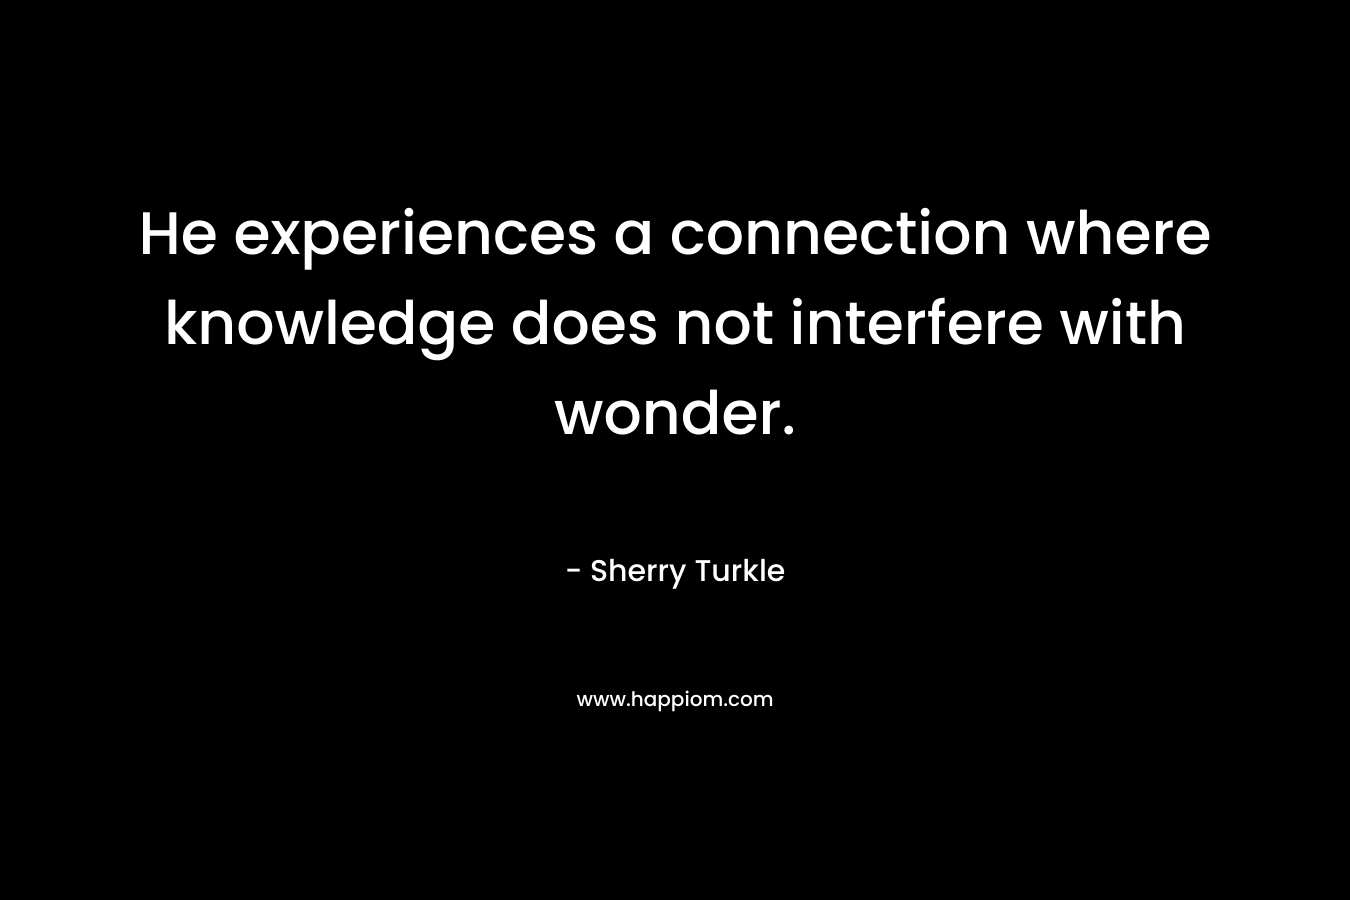 He experiences a connection where knowledge does not interfere with wonder. – Sherry Turkle